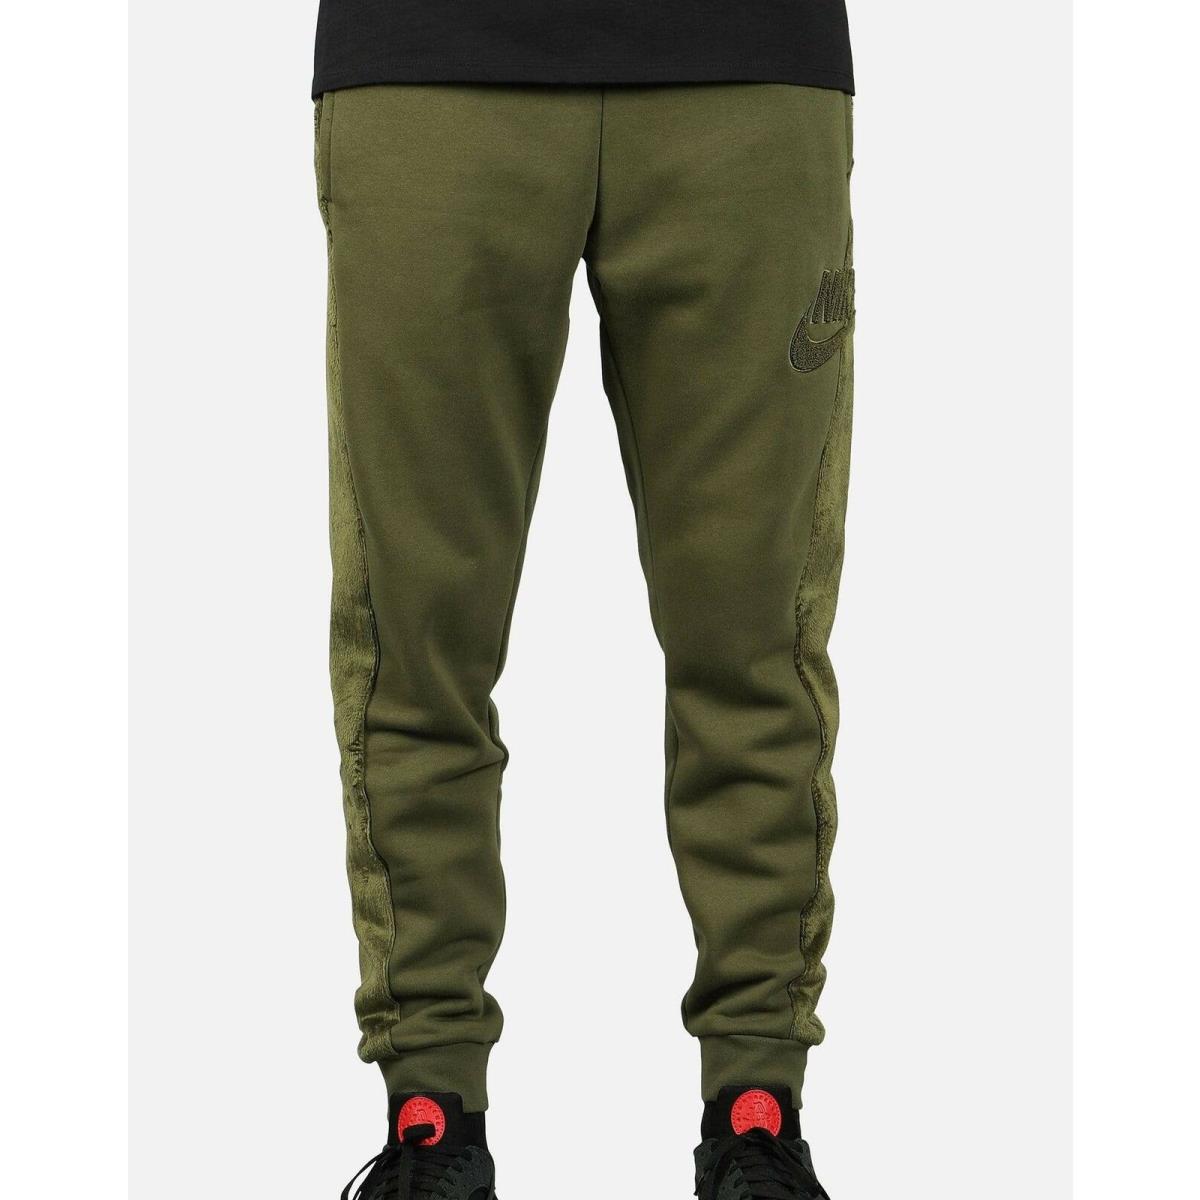 929130-395 Nike Nsw Hairy Sherpa Winter Jogger Pants - Olive Green